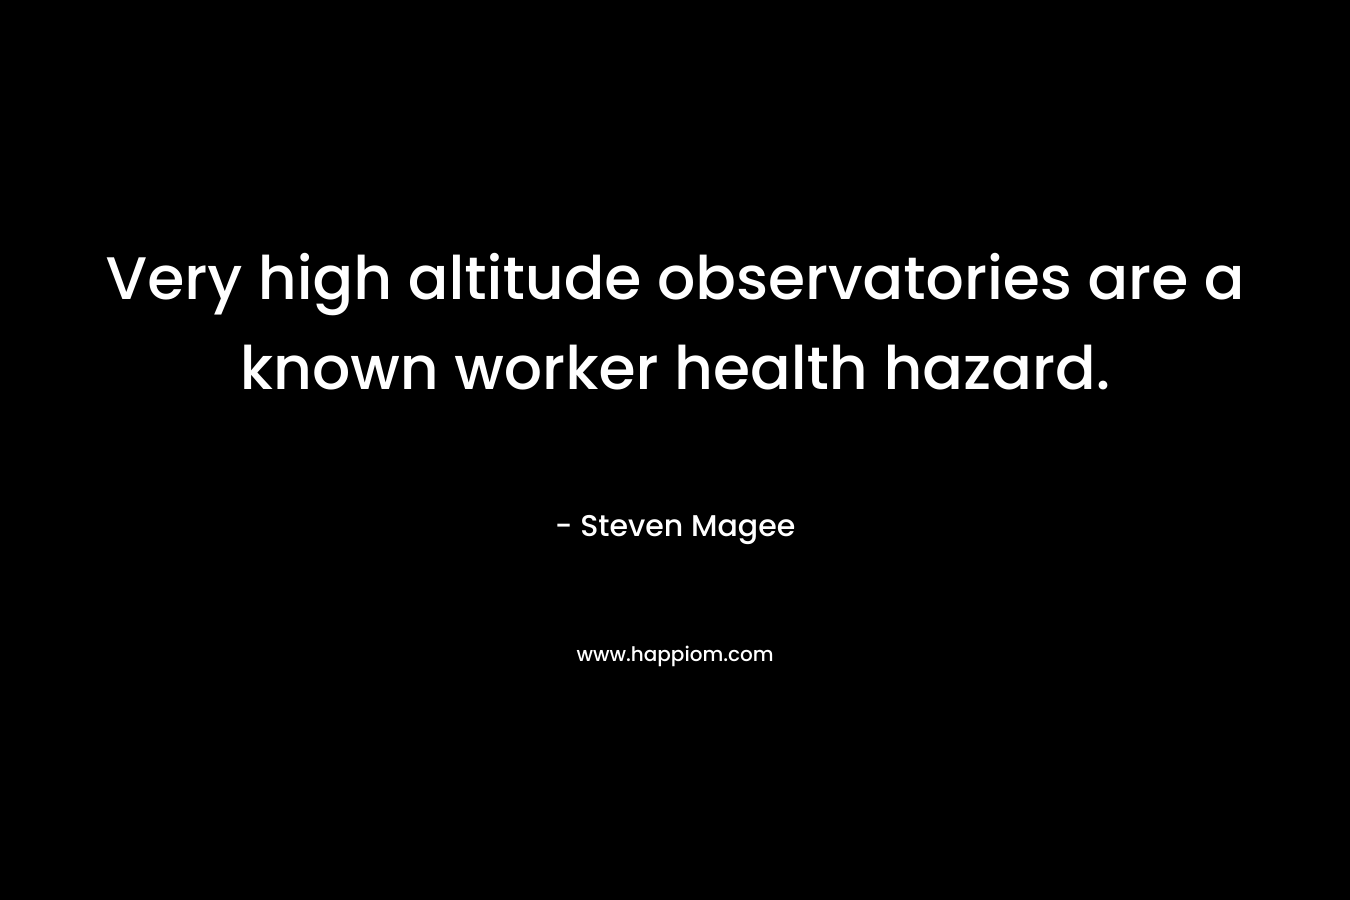 Very high altitude observatories are a known worker health hazard. – Steven Magee